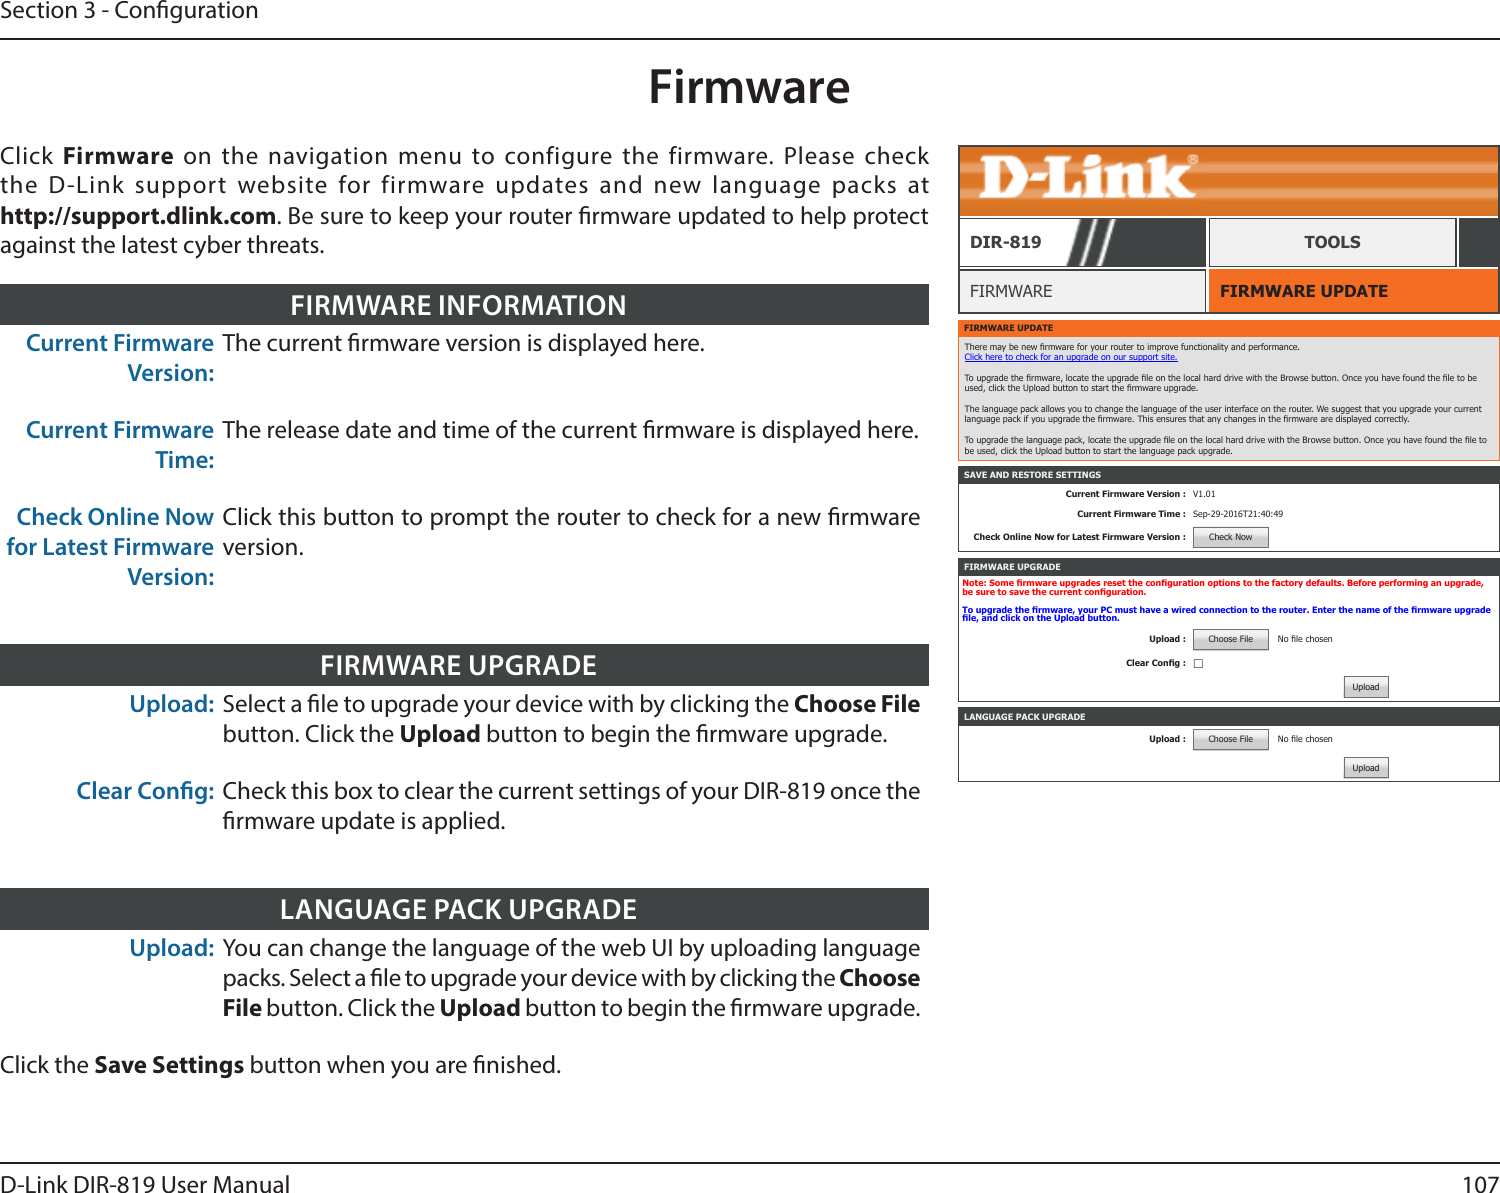 107D-Link DIR-819 User ManualSection 3 - CongurationFirmwareFIRMWARE UPDATEFIRMWAREDIR-819 TOOLSClick  Firmware  on the navigation menu to configure the firmware. Please check the D-Link support website for firmware updates and new language packs at  http://support.dlink.com. Be sure to keep your router rmware updated to help protect against the latest cyber threats.Current Firmware Version:The current rmware version is displayed here.Current Firmware Time:The release date and time of the current rmware is displayed here.Check Online Now for Latest Firmware Version:Click this button to prompt the router to check for a new rmware version.FIRMWARE INFORMATIONUpload: Select a le to upgrade your device with by clicking the Choose File button. Click the Upload button to begin the rmware upgrade.Clear Cong: Check this box to clear the current settings of your DIR-819 once the rmware update is applied.FIRMWARE UPGRADEUpload: You can change the language of the web UI by uploading language packs. Select a le to upgrade your device with by clicking the Choose File button. Click the Upload button to begin the rmware upgrade.Click the Save Settings button when you are nished.LANGUAGE PACK UPGRADEFIRMWARE UPDATEThere may be new rmware for your router to improve functionality and performance. Click here to check for an upgrade on our support site. To upgrade the rmware, locate the upgrade le on the local hard drive with the Browse button. Once you have found the le to be used, click the Upload button to start the rmware upgrade. The language pack allows you to change the language of the user interface on the router. We suggest that you upgrade your current language pack if you upgrade the rmware. This ensures that any changes in the rmware are displayed correctly. To upgrade the language pack, locate the upgrade le on the local hard drive with the Browse button. Once you have found the le to be used, click the Upload button to start the language pack upgrade.SAVE AND RESTORE SETTINGSCurrent Firmware Version : V1.01Current Firmware Time : Sep-29-2016T21:40:49Check Online Now for Latest Firmware Version : Check NowLANGUAGE PACK UPGRADEUpload : Choose File No le chosenUploadFIRMWARE UPGRADENote: Some rmware upgrades reset the conguration options to the factory defaults. Before performing an upgrade, be sure to save the current conguration.To upgrade the rmware, your PC must have a wired connection to the router. Enter the name of the rmware upgrade le, and click on the Upload button.Upload : Choose File No le chosenClear Cong : ☐Upload